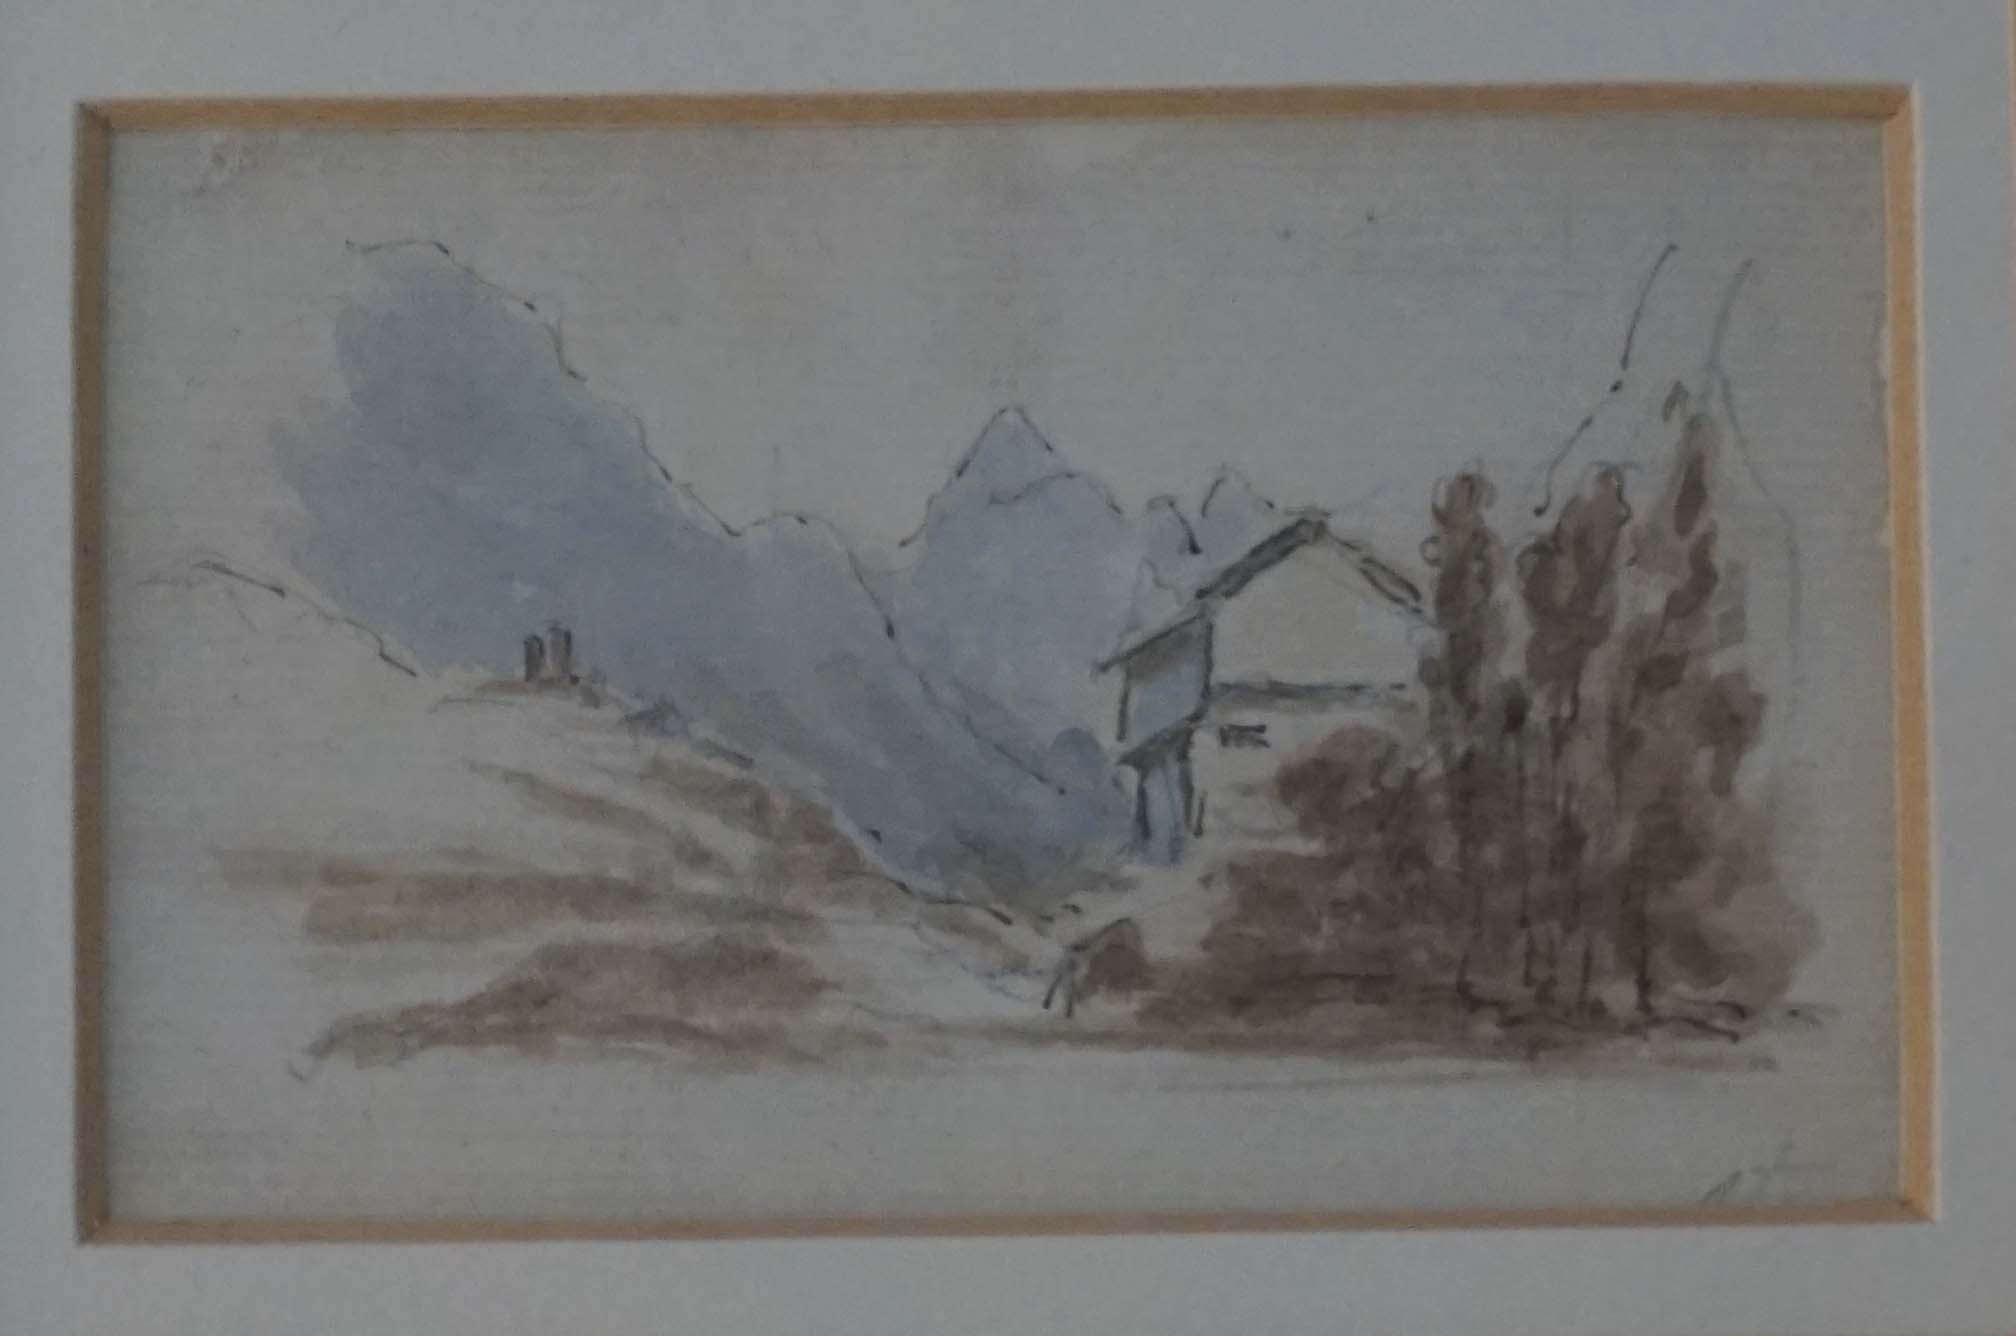 Attributed to Sir Augustus Wall Hallcott (British, 1779-1844) - 'Mountain landscape', watercolour on